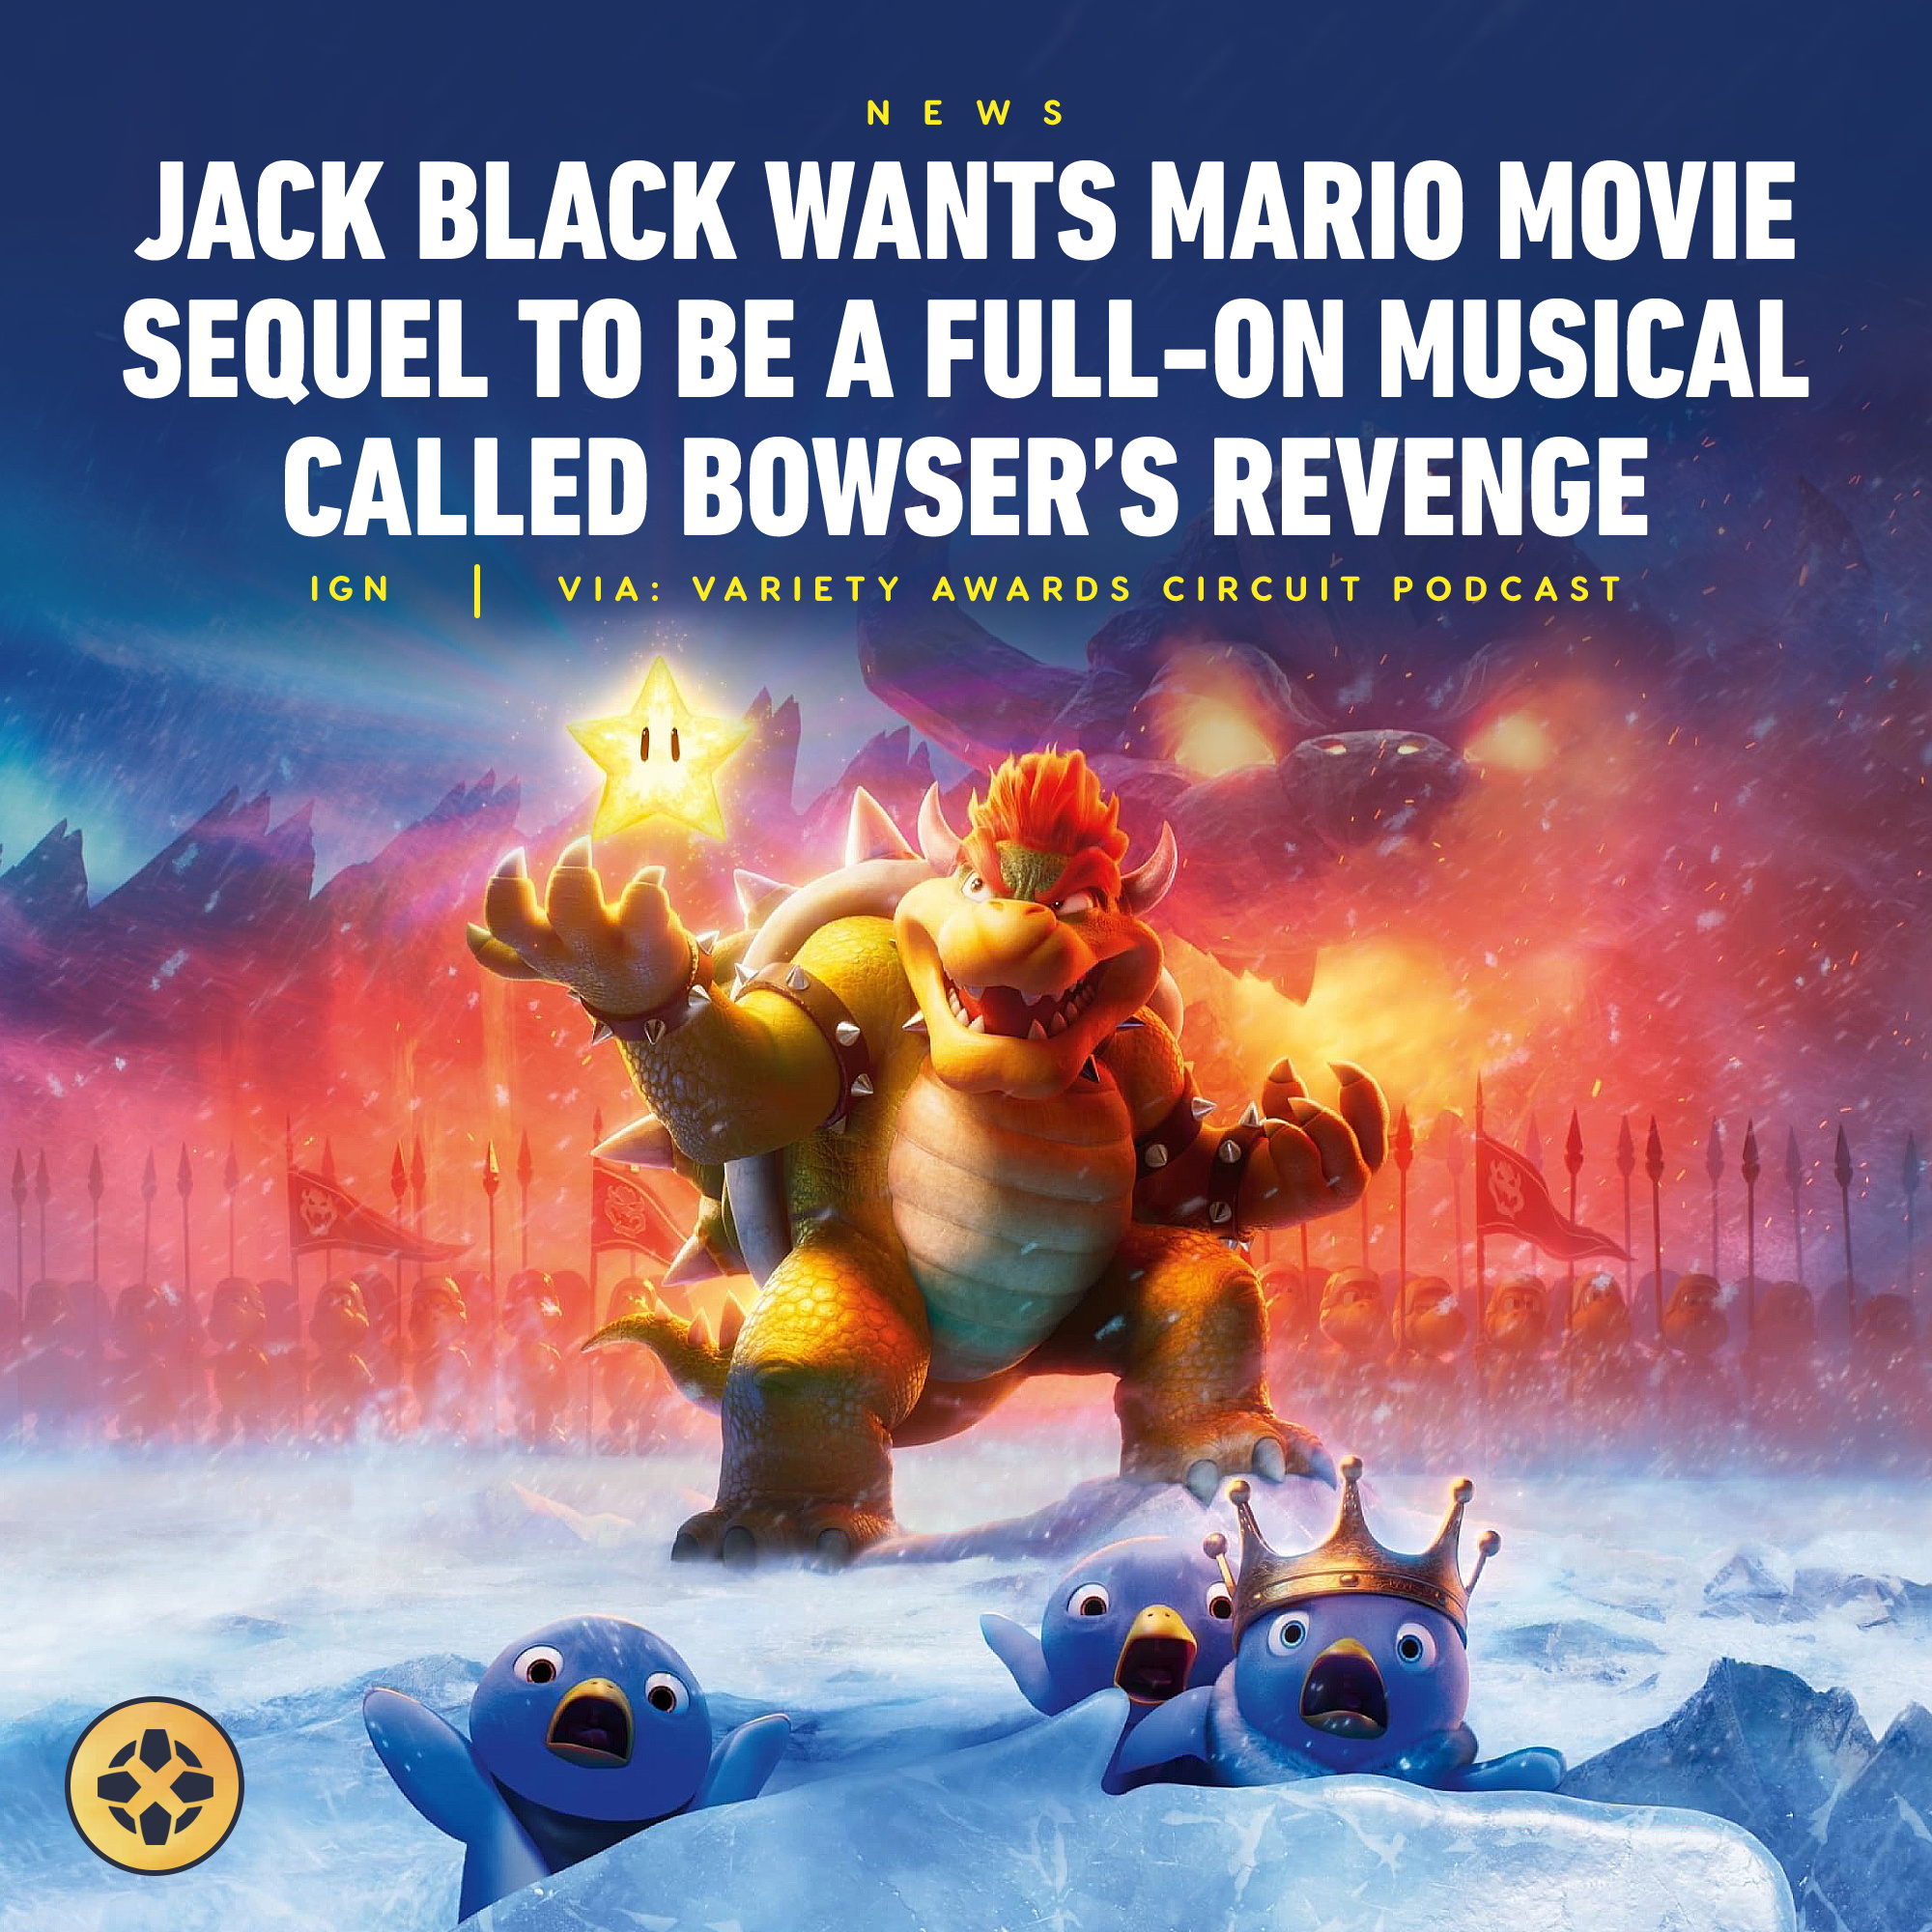 IGN on X: Universal confirmed to Variety that Jack Black's ballad